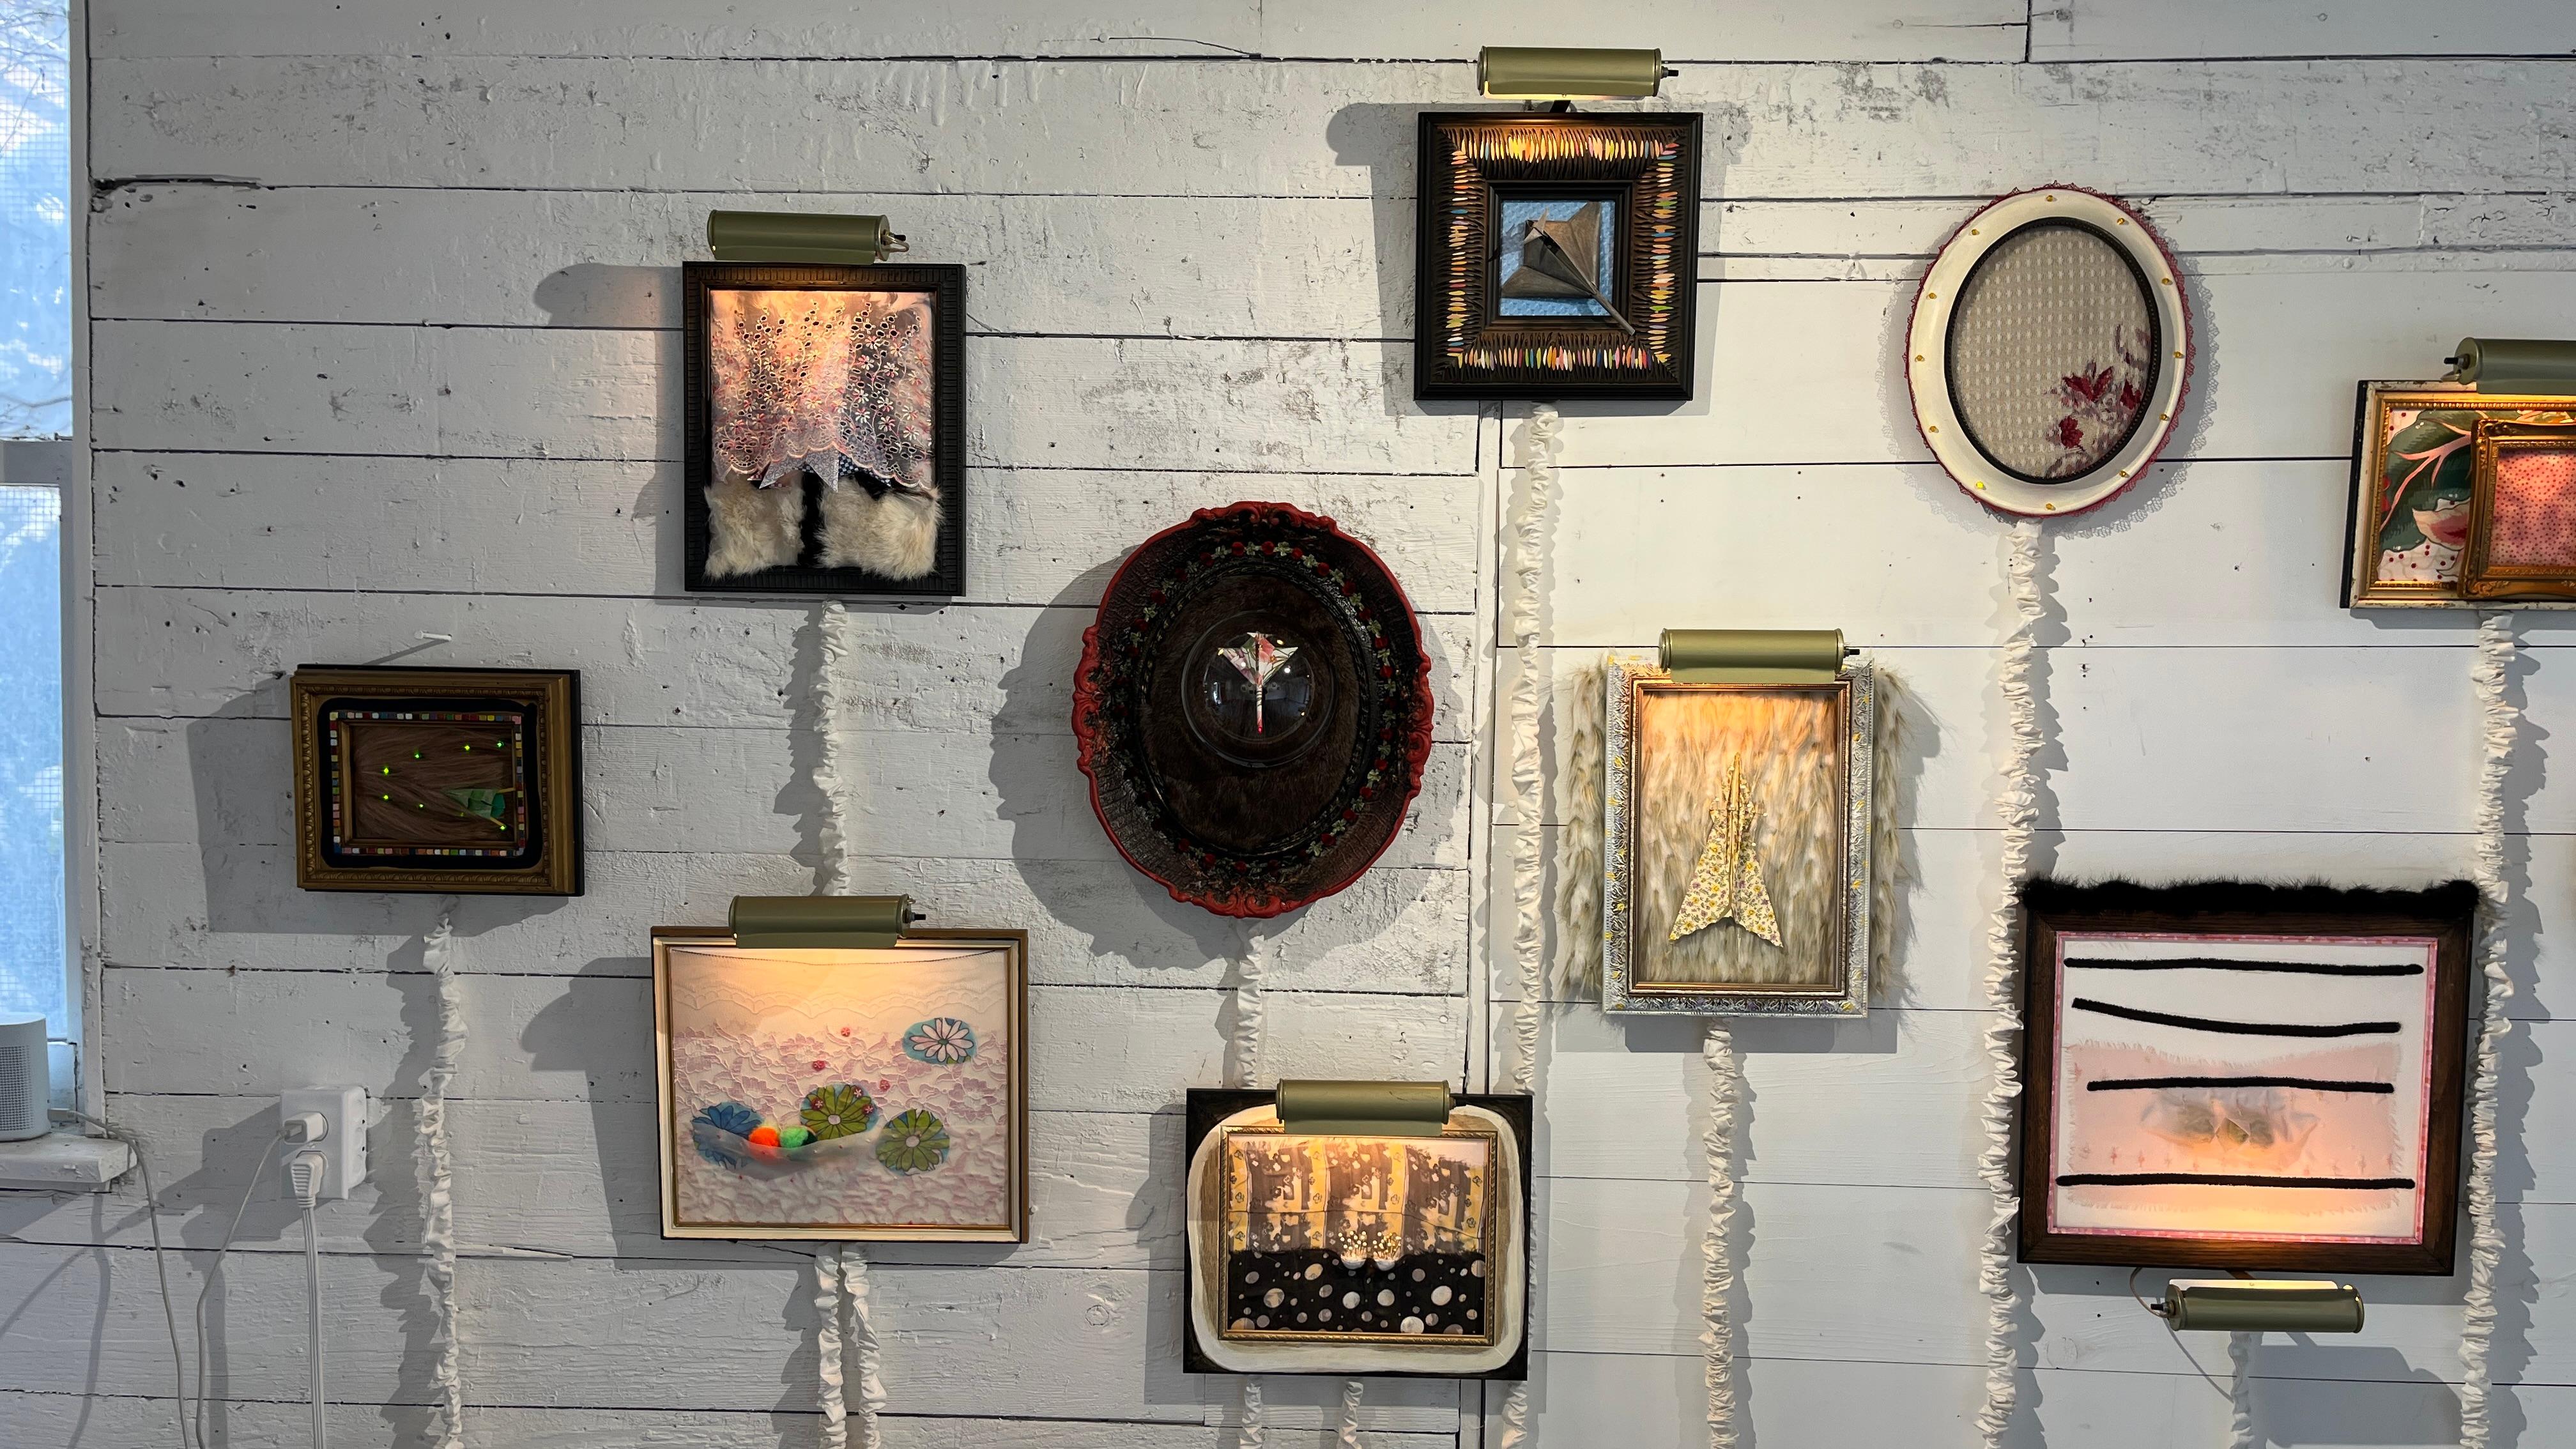 “Specimen“ is a mixed media piece by artist Heather Nicol, and measures 16x13x3“. Part of a body of work known as Salon, this particular assemblage is comprised of frame, faux fur, paper, pins and electric picture light, on board. The artist